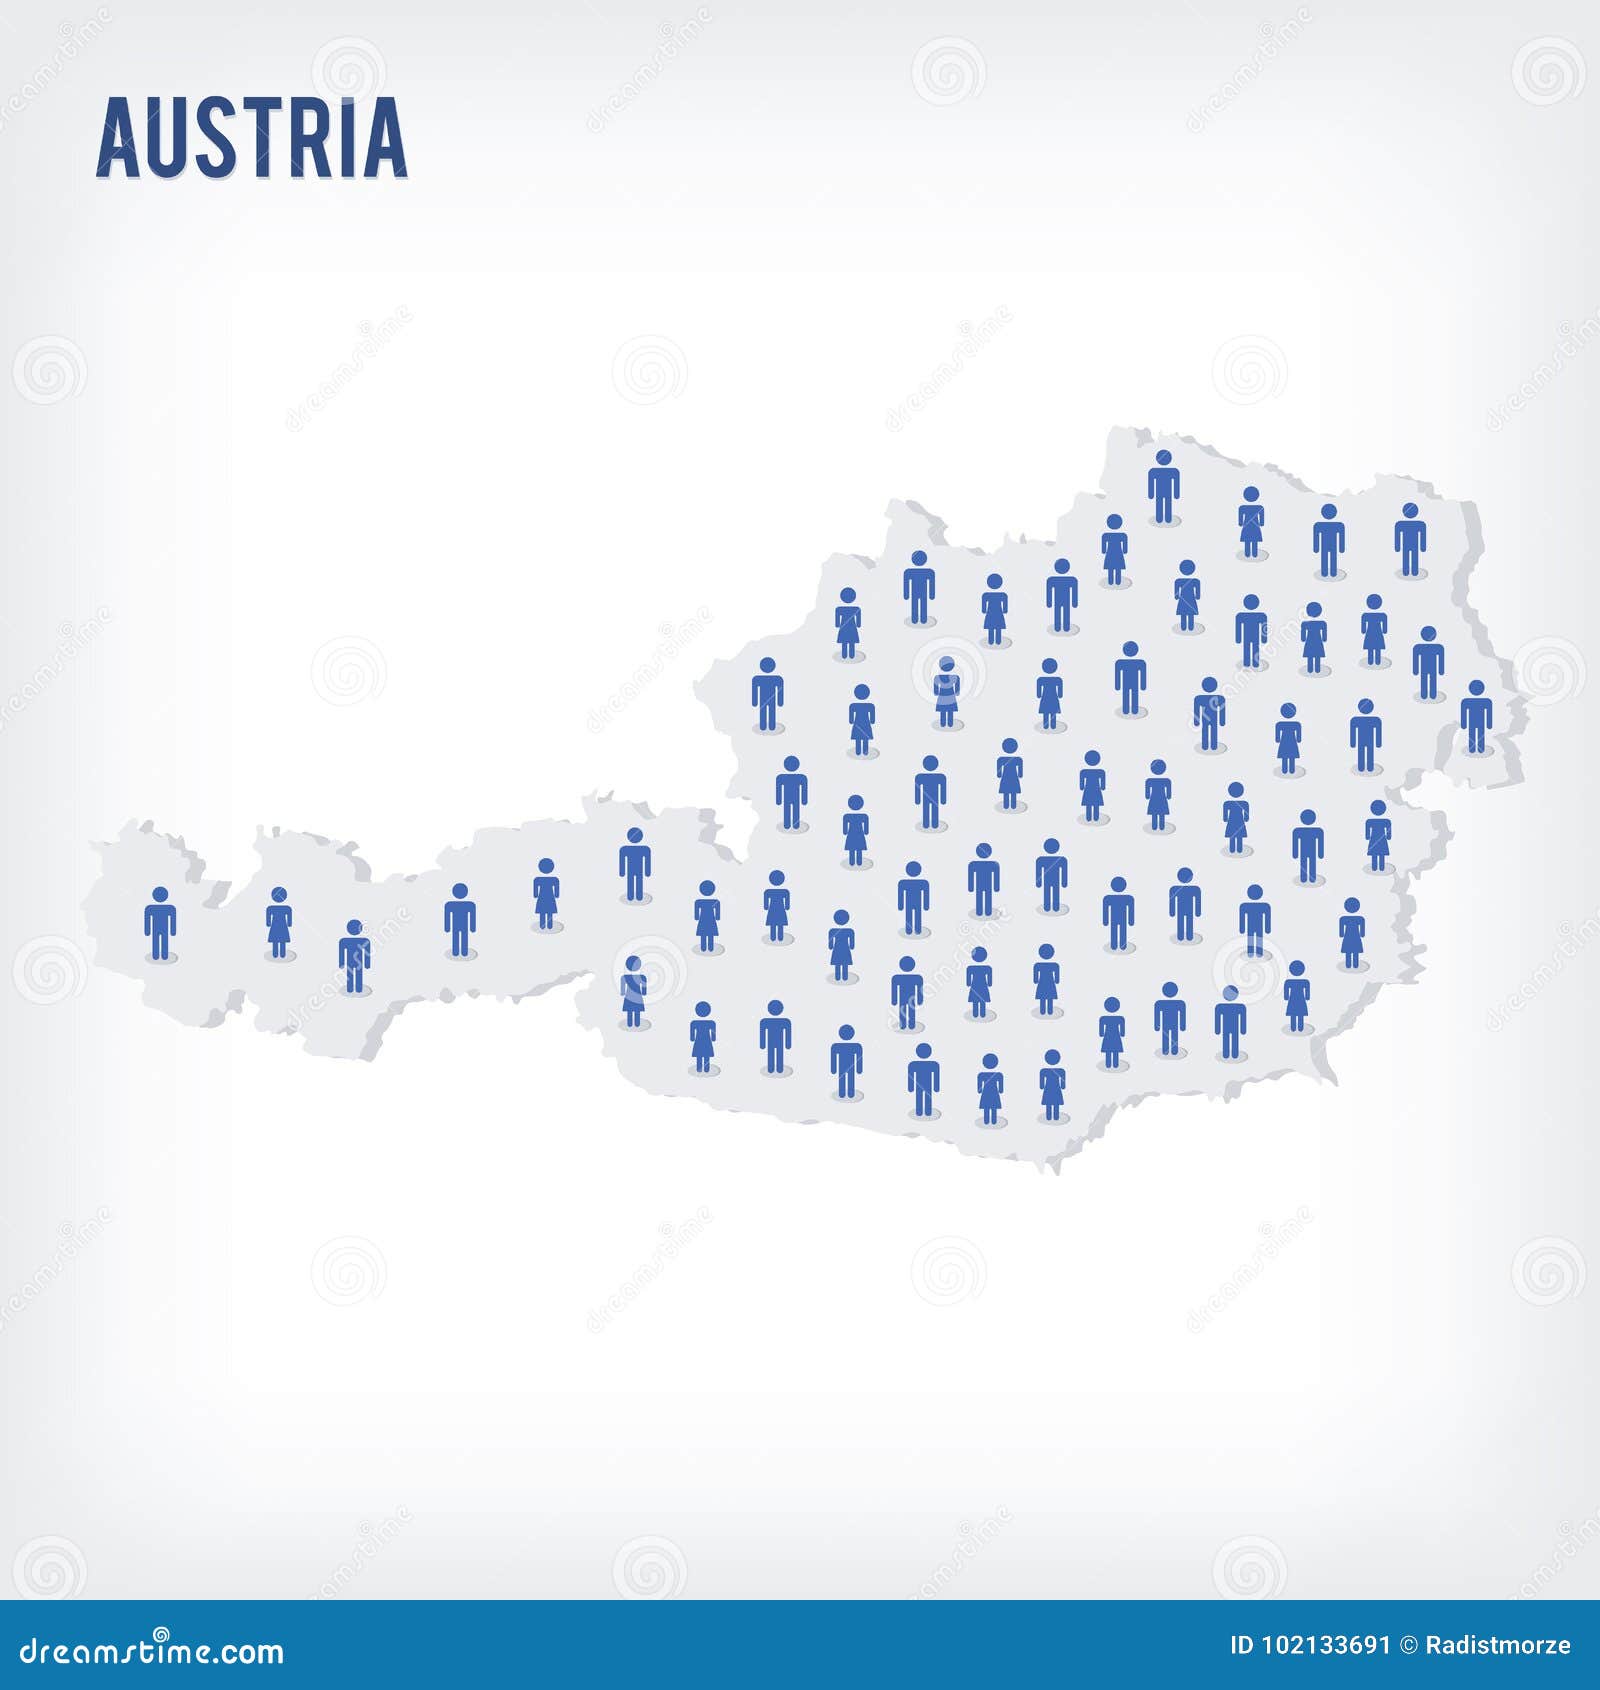 Vector People Map Of Austria The Concept Of Population Stock Vector Illustration Of Abstract Element 102133691